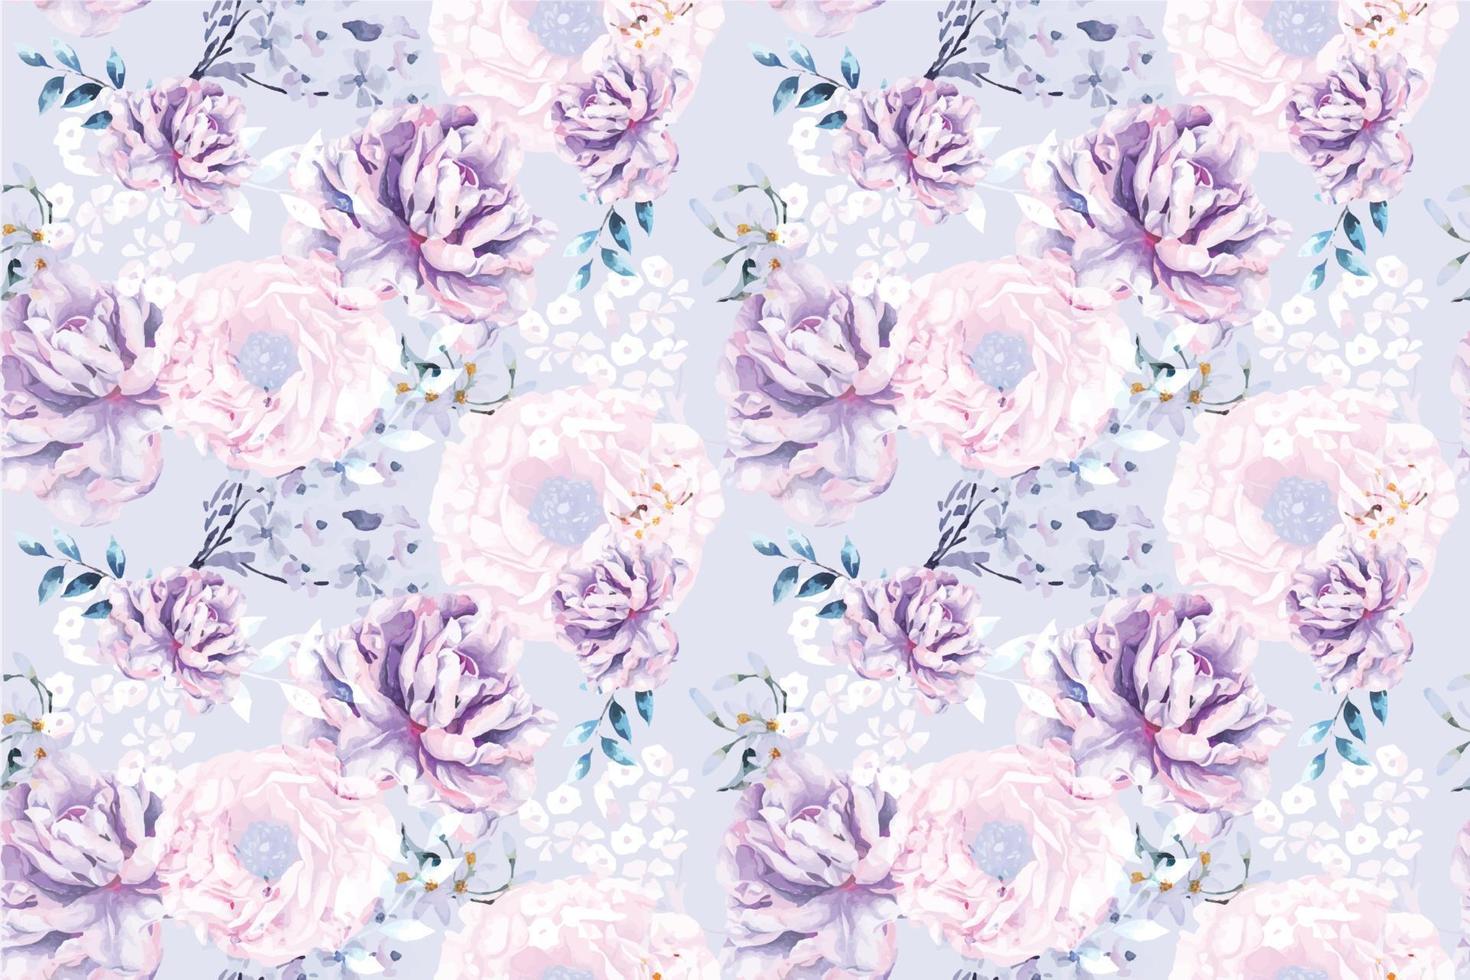 Seamless pattern of rose and blooming flowers painted in watercolor on purple background.Designed for fabric luxurious and wallpaper, vintage style.Hand drawn botanical floral pattern. vector